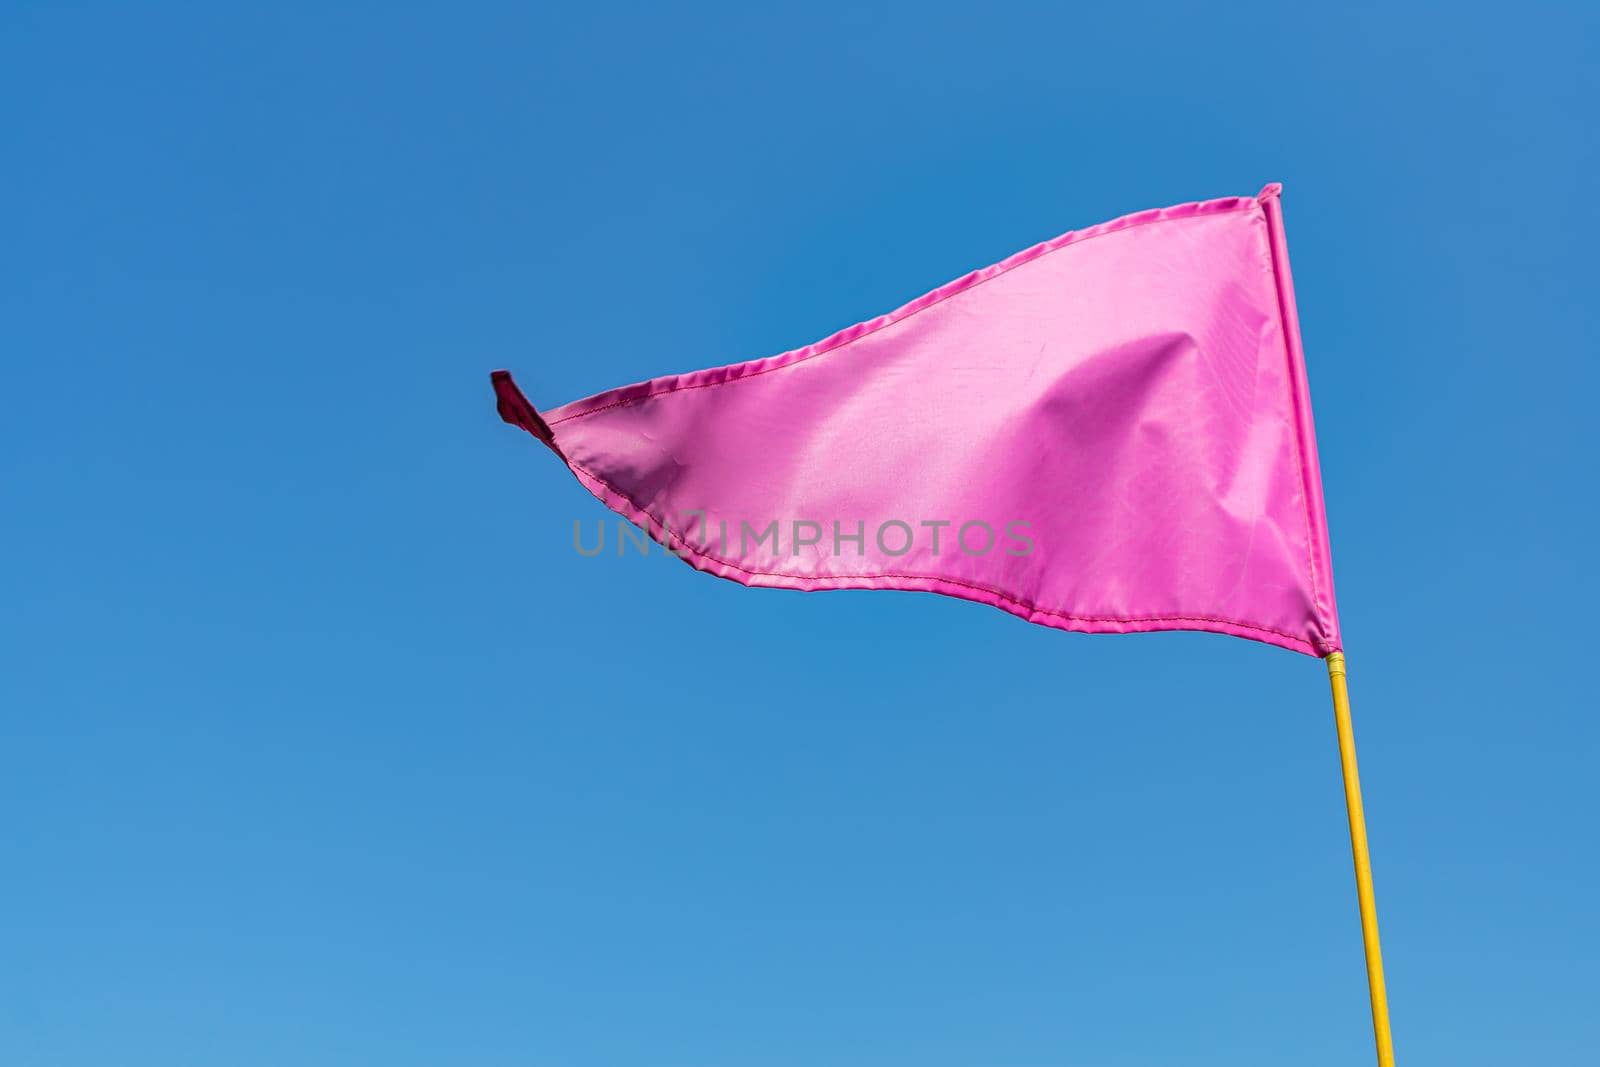 Pink sports flag on a yellow flagpole sways in the wind against a clear blue sky